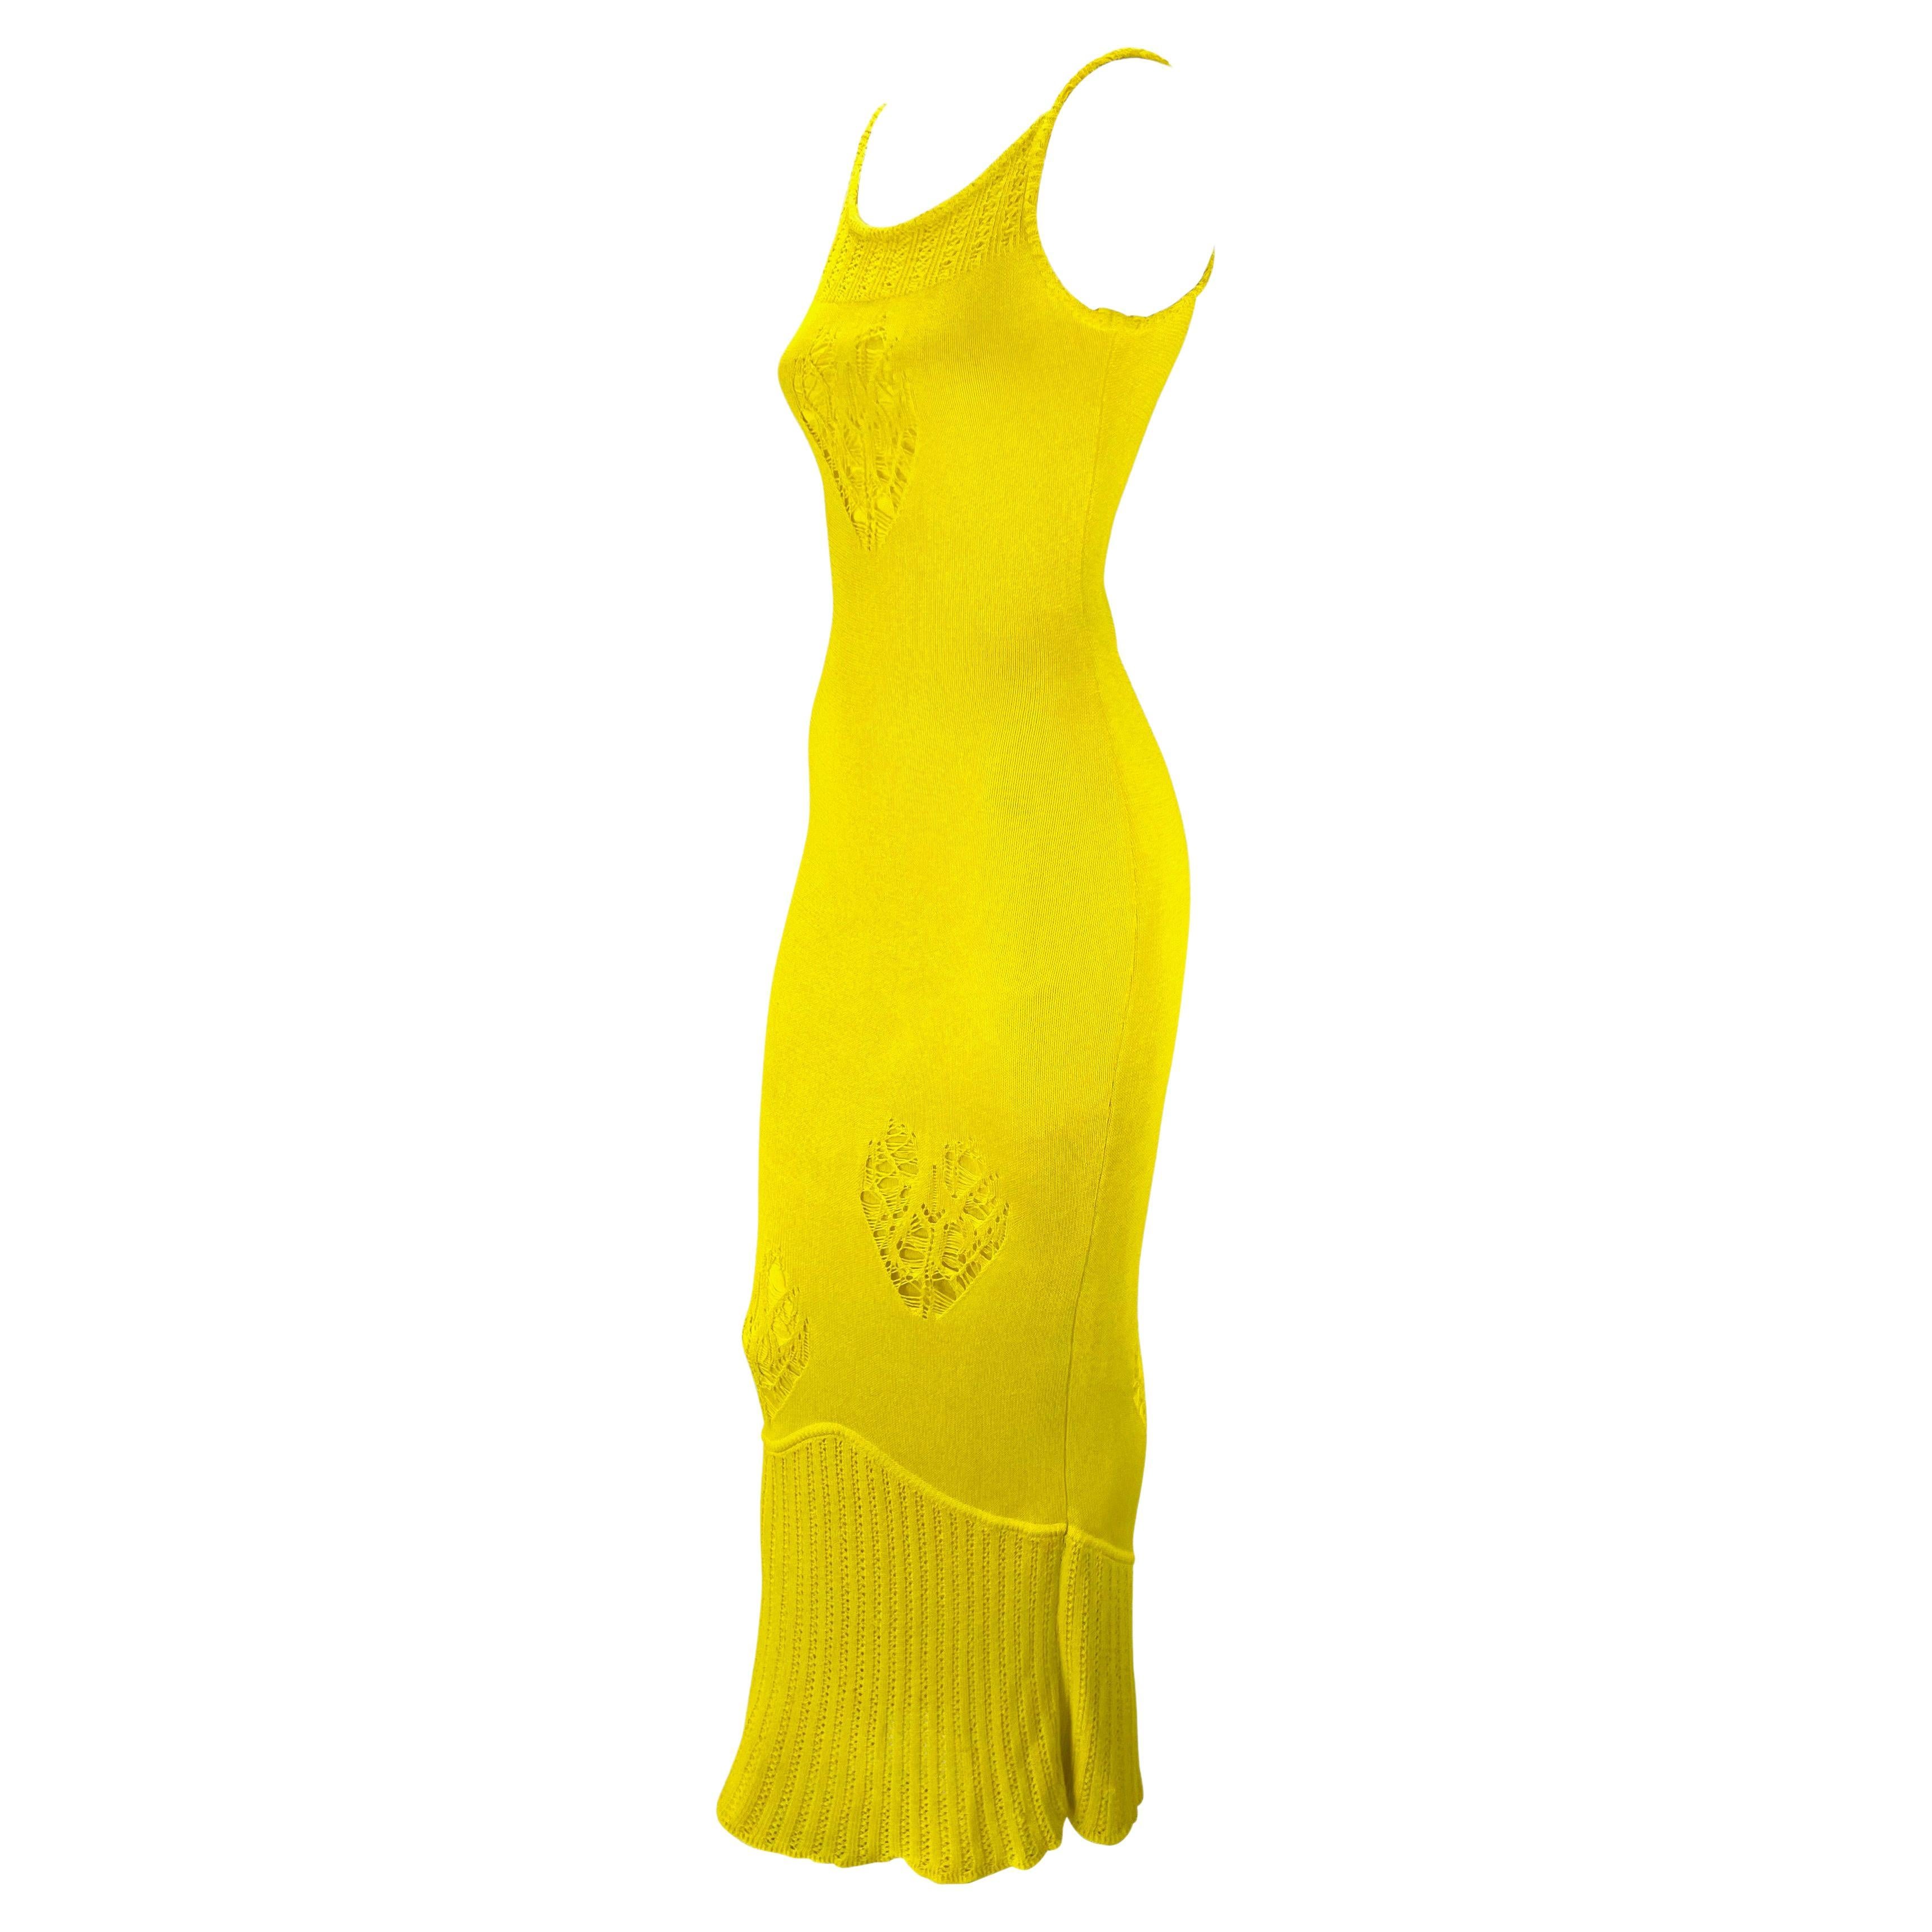 Presenting a gorgeous canary yellow John Galliano knit gown. From Galliano's Spring/Summer 2000 collection, this knit slip dress features a wide scoop neckline and back. The dress features different knitting patterns and is made complete with